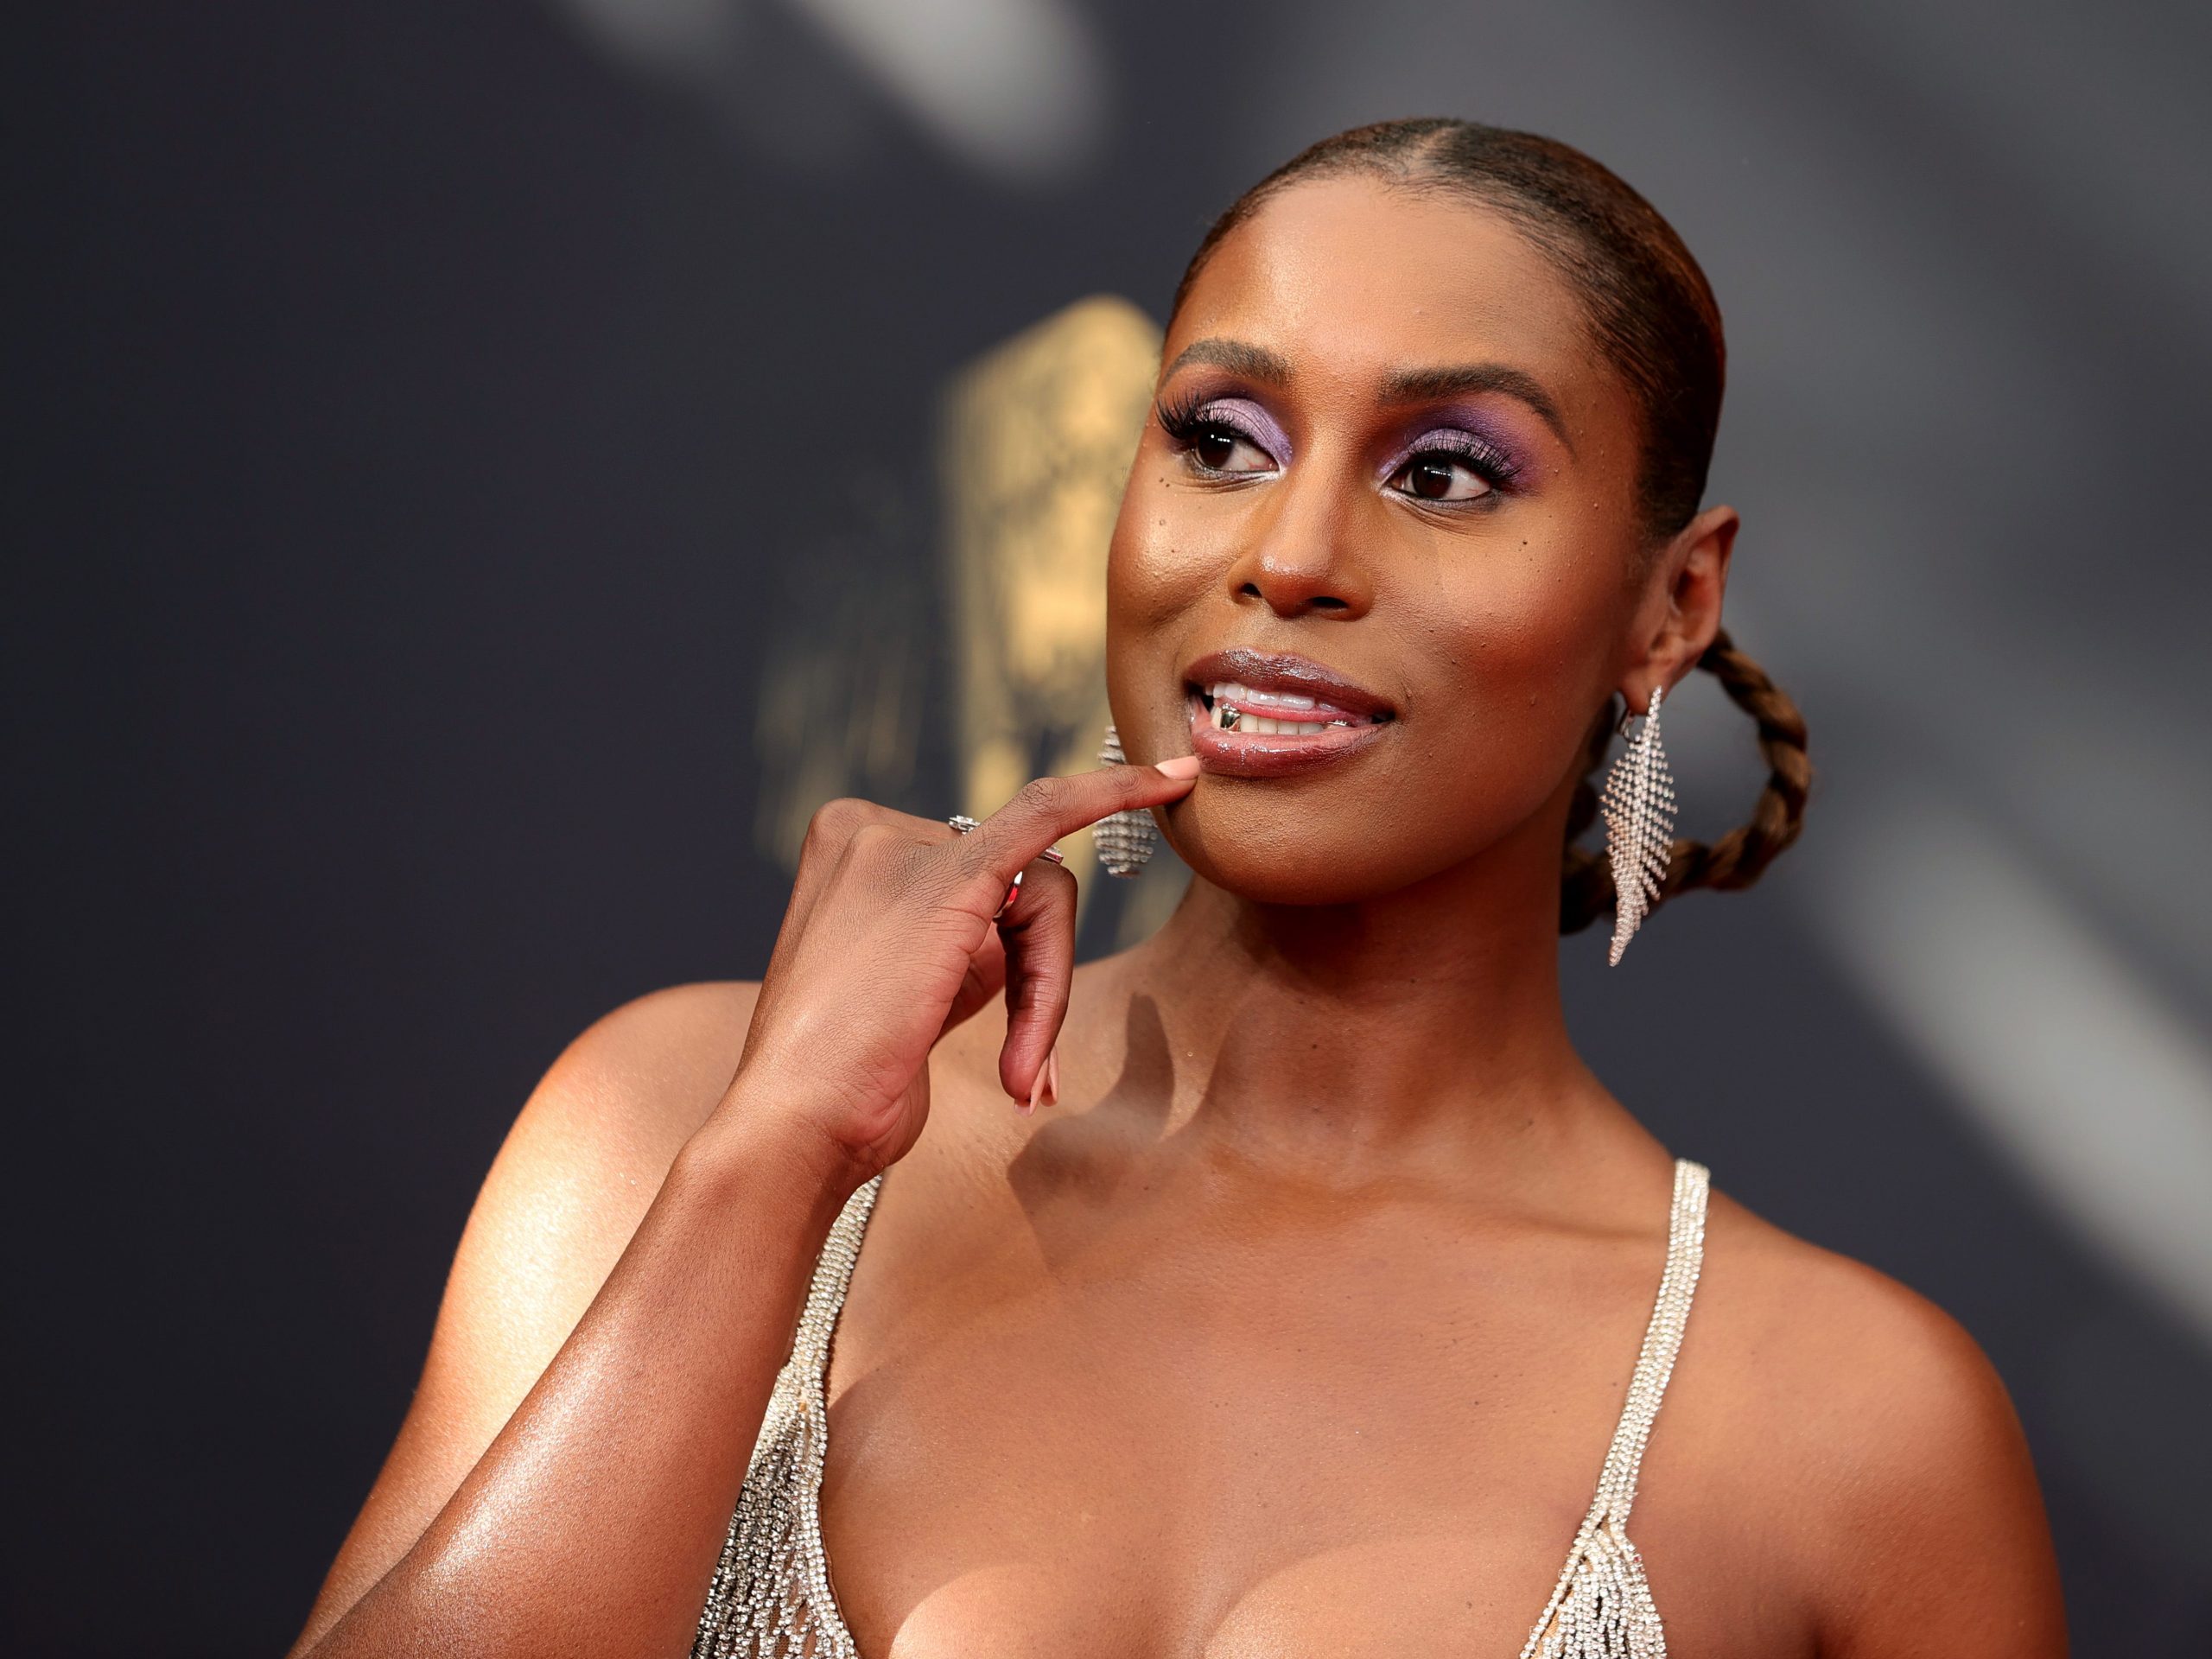 Issa Rae attends the 73rd Primetime Emmy Awards at L.A. LIVE on September 19, 2021 in Los Angeles, California.